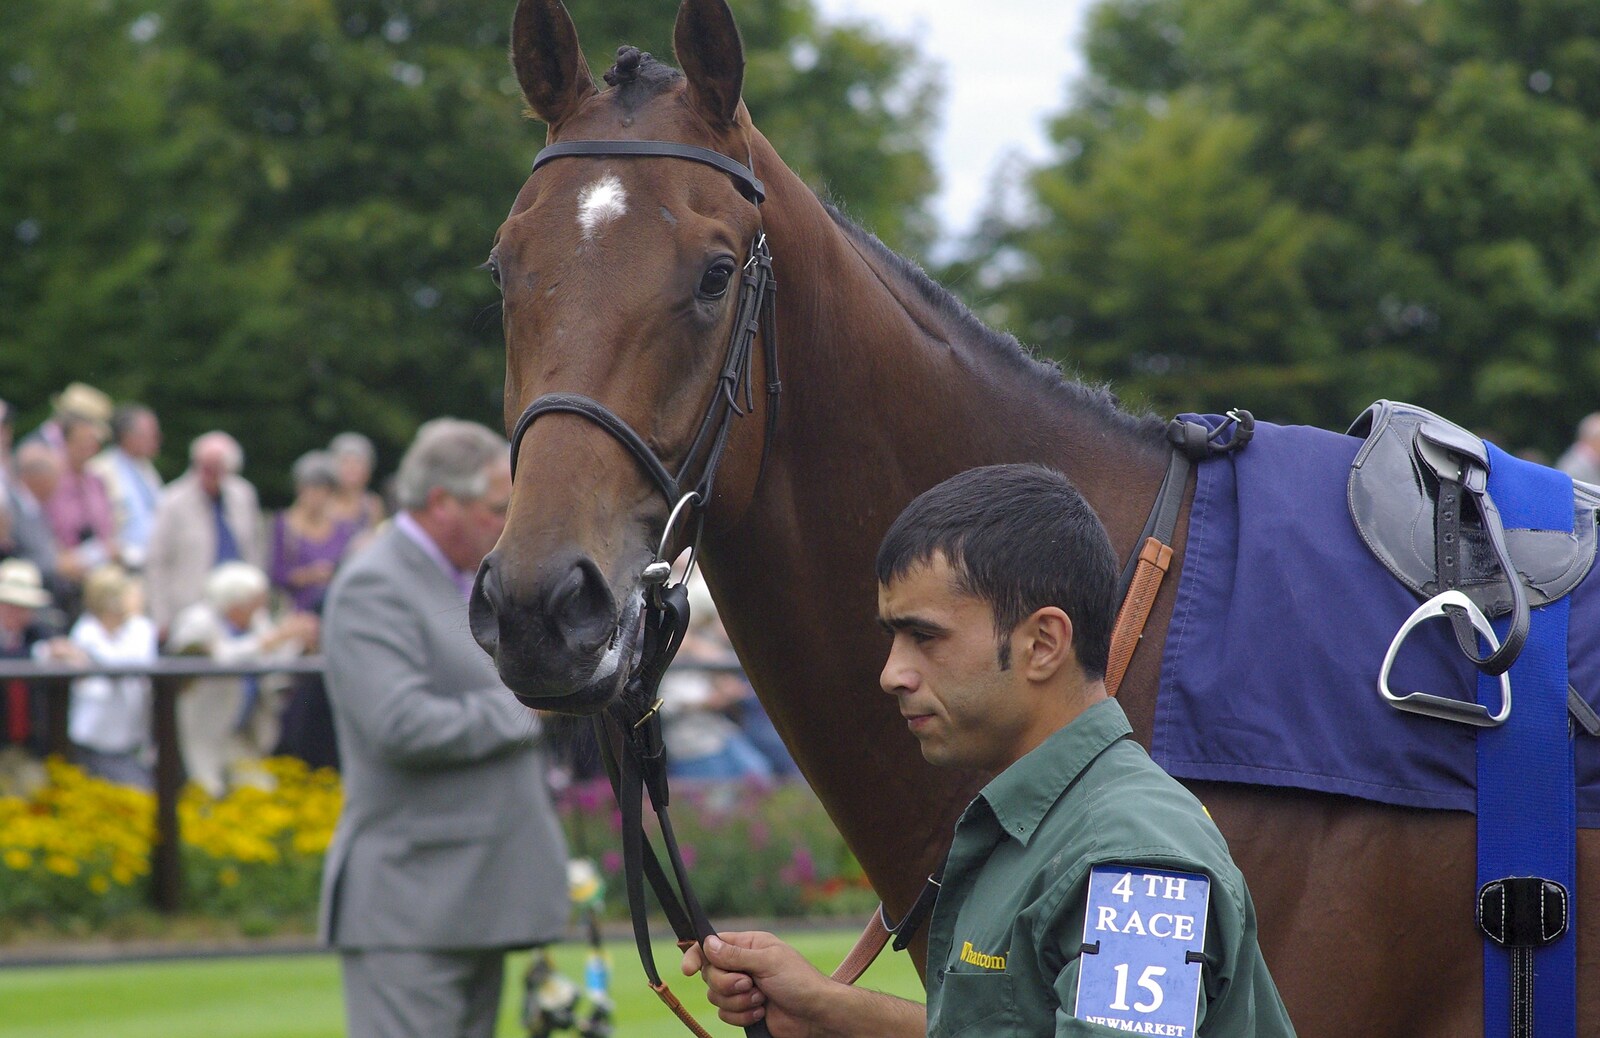 A perky-eared thoroughbread is paraded  from A Day At The Races, Newmarket, Suffolk - 23rd August 2008